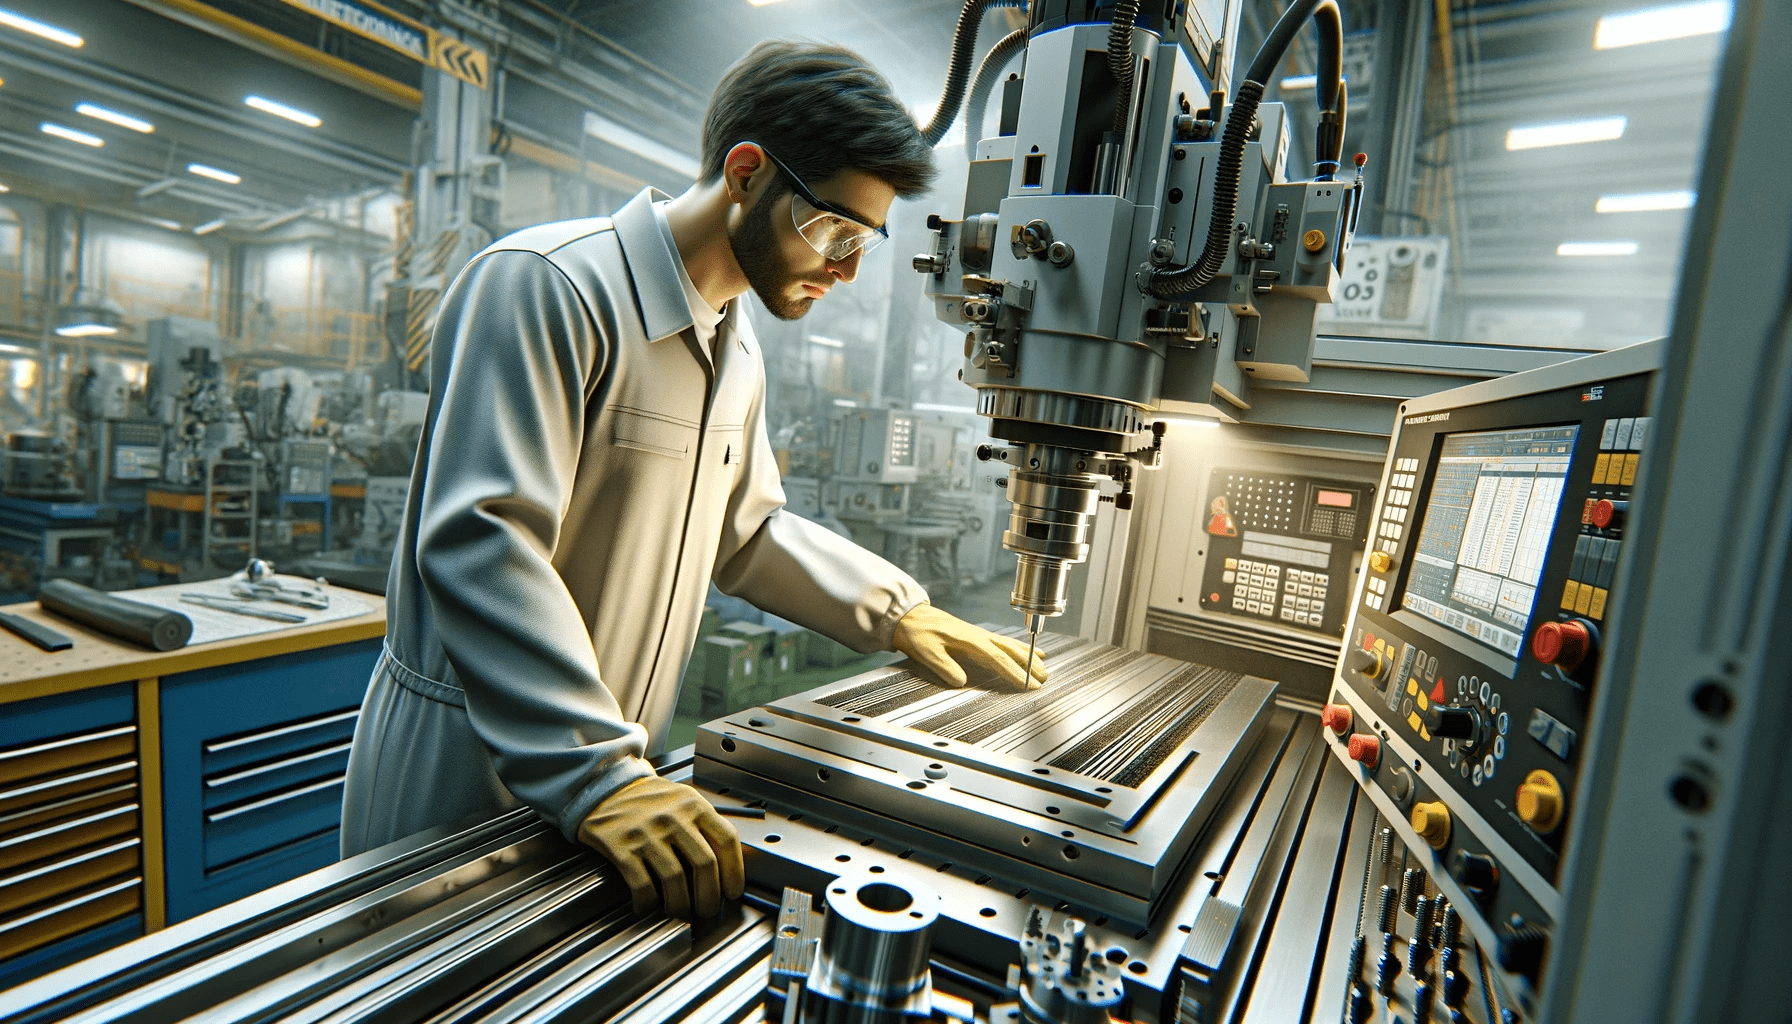 CNC machinist in a CNC workshop environment. The machinist, wearing protective gear, is intently operating a CNC machine.